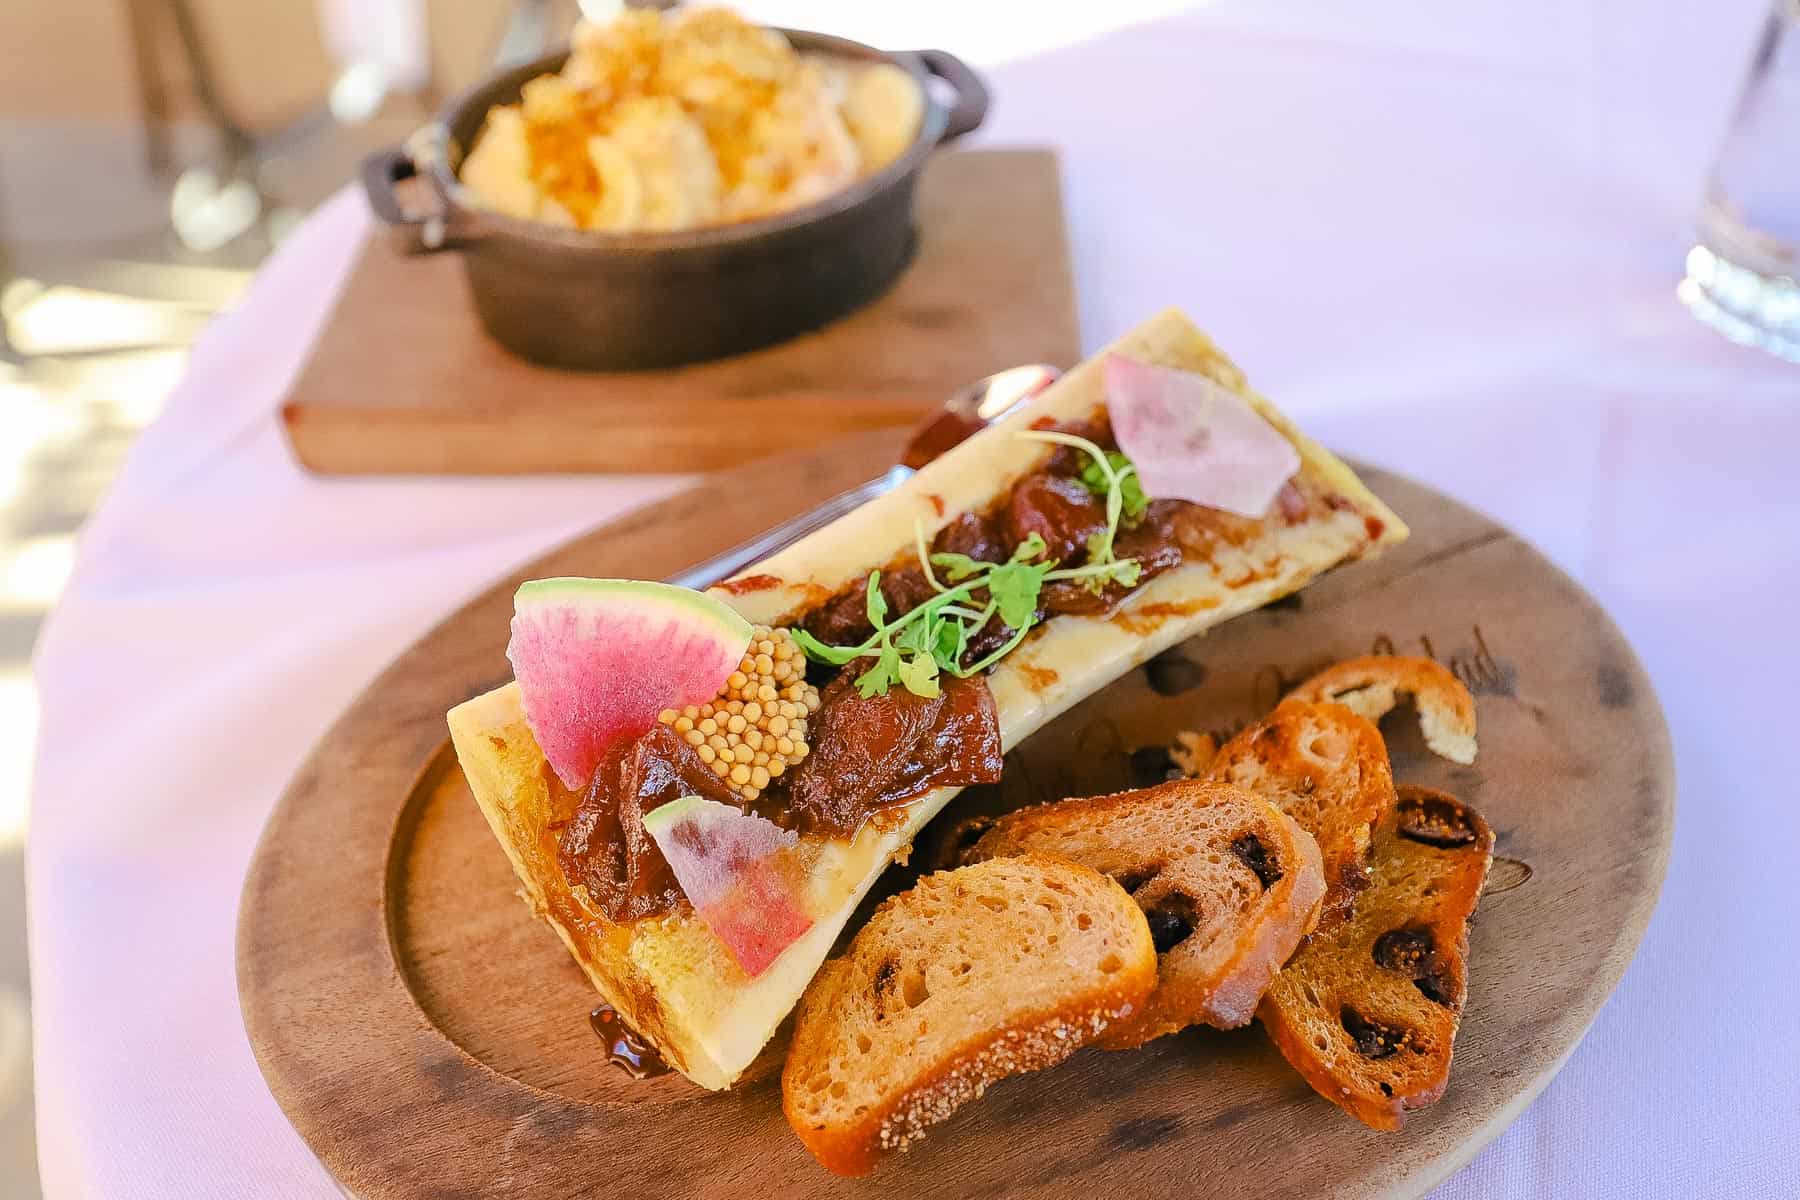 A photo of a meal at a Disney restaurant that includes bone marrow. 